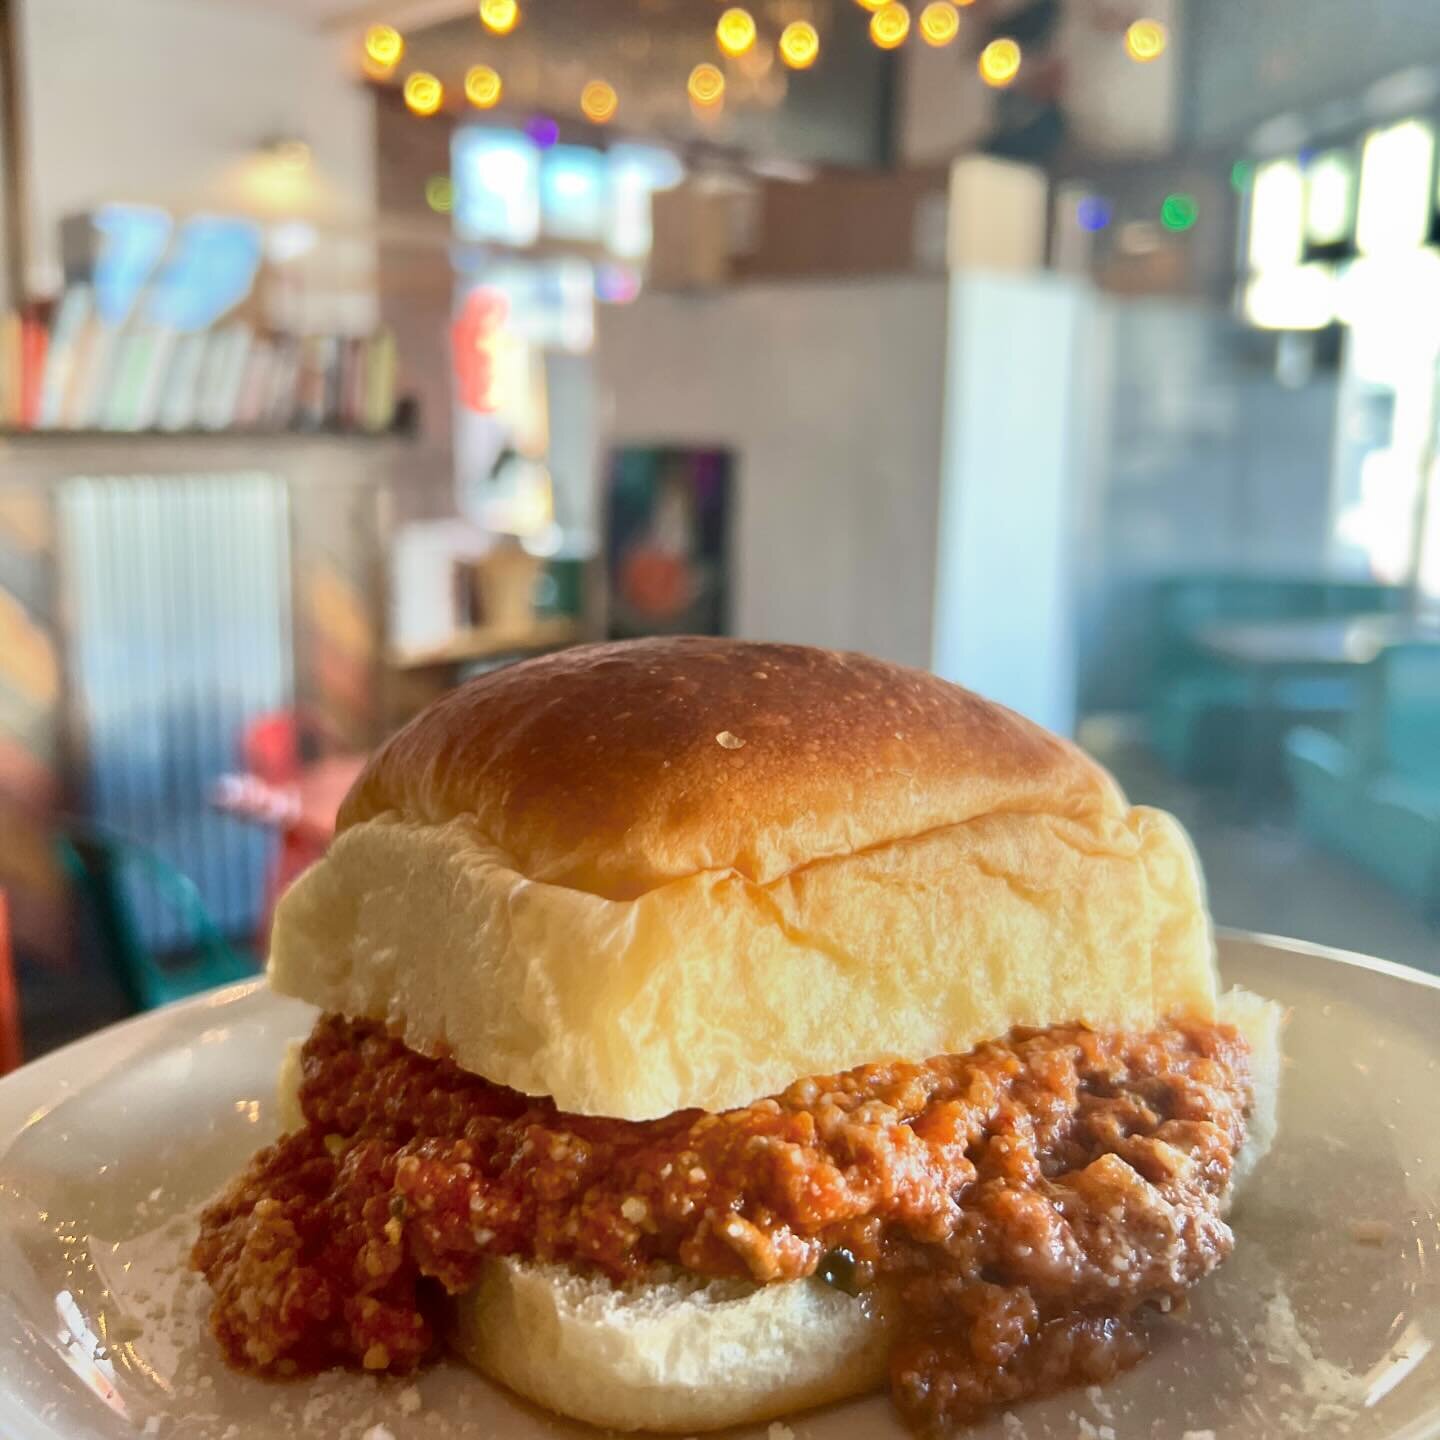 Sloppy Joels till they&rsquo;re gone. A blend or our broken meatballs, traditional bolognese. and our red sauce used to cook meatballs served on our Japanese milkbread buns with mozz and parm #sloppyjoes #shakupan #milkbread #melkbread #michigancraft